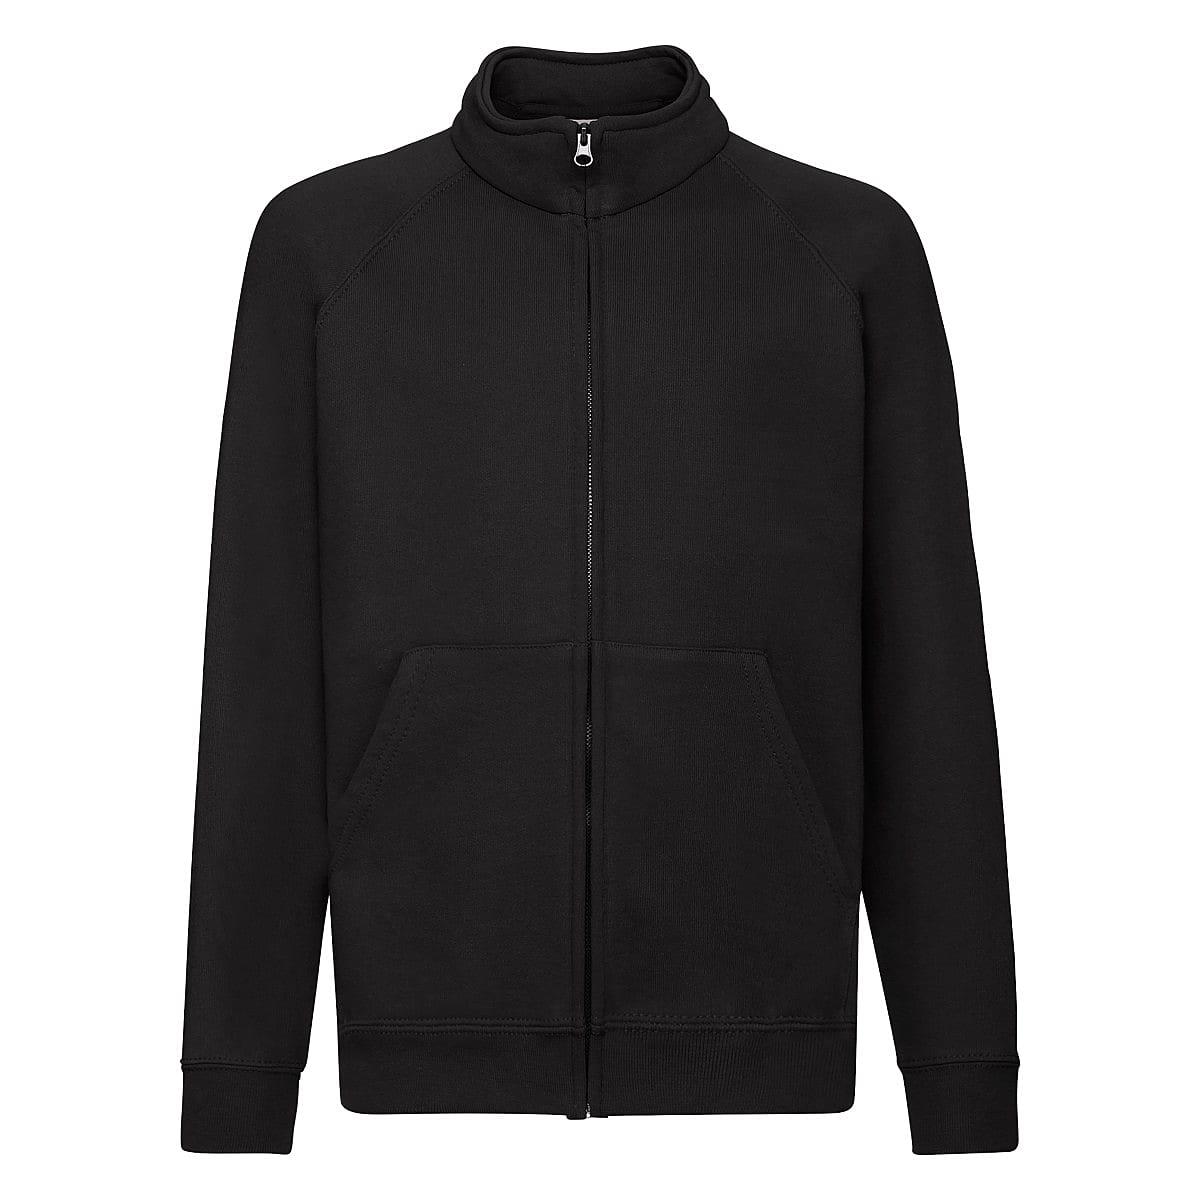 Fruit Of The Loom Childrens Sweat Jacket in Black (Product Code: 62005)